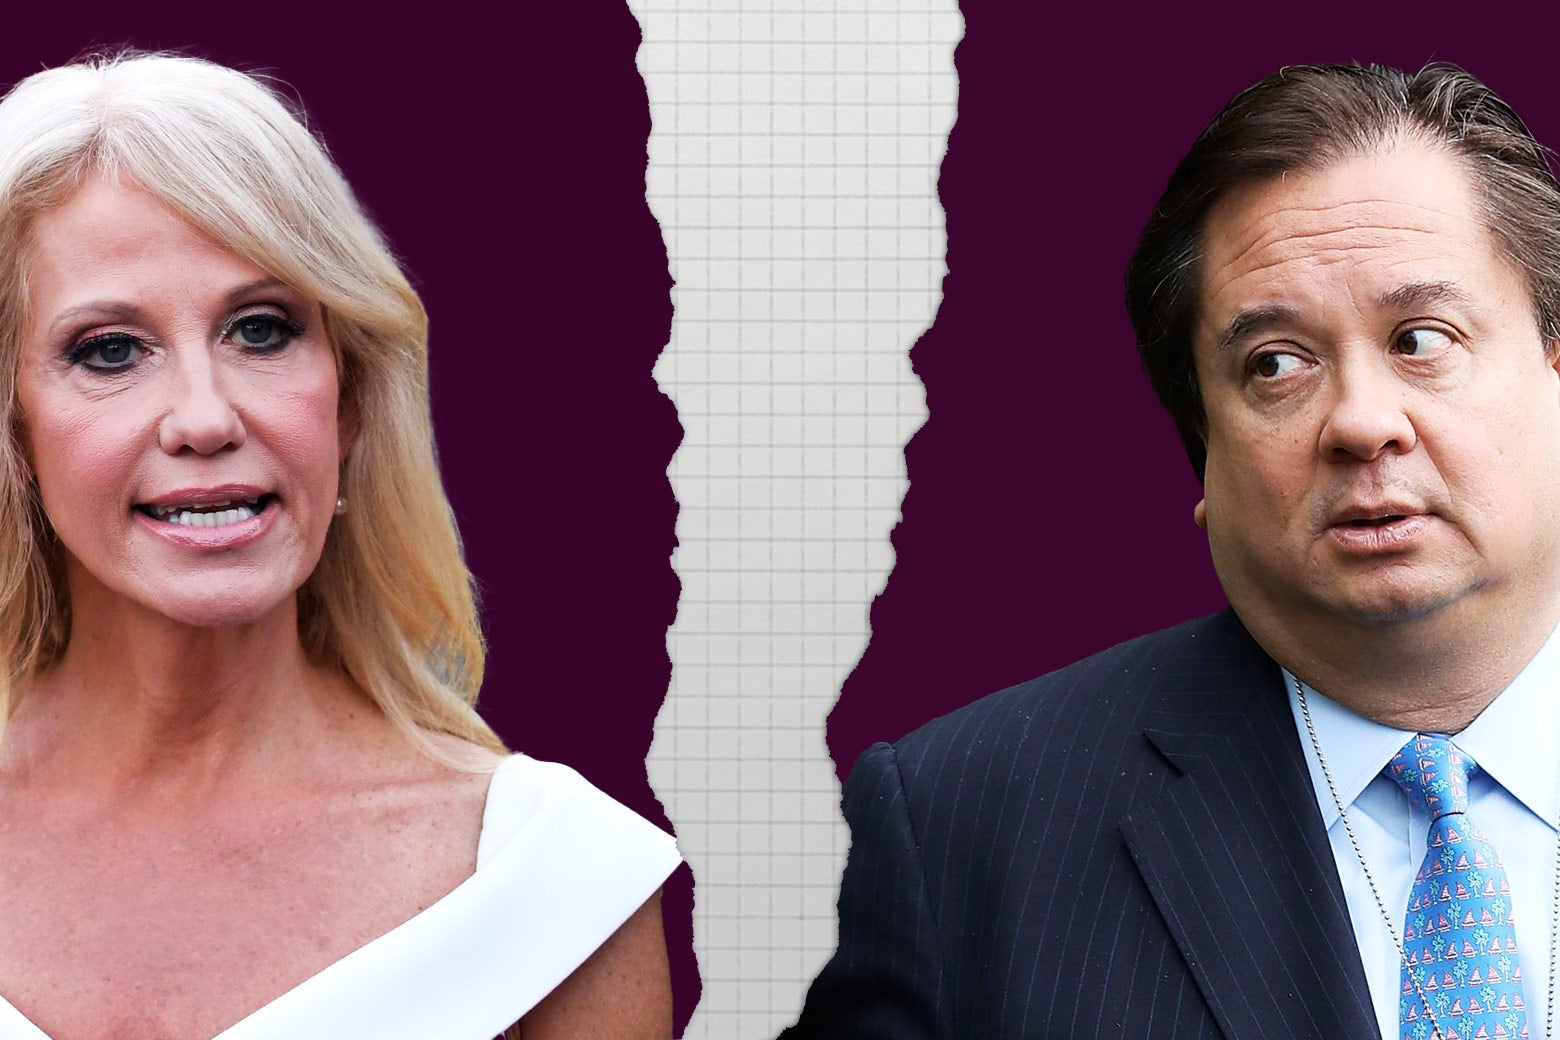 Kellyanne and George Conway have split up as evidenced by a rip in the fabric between them. 